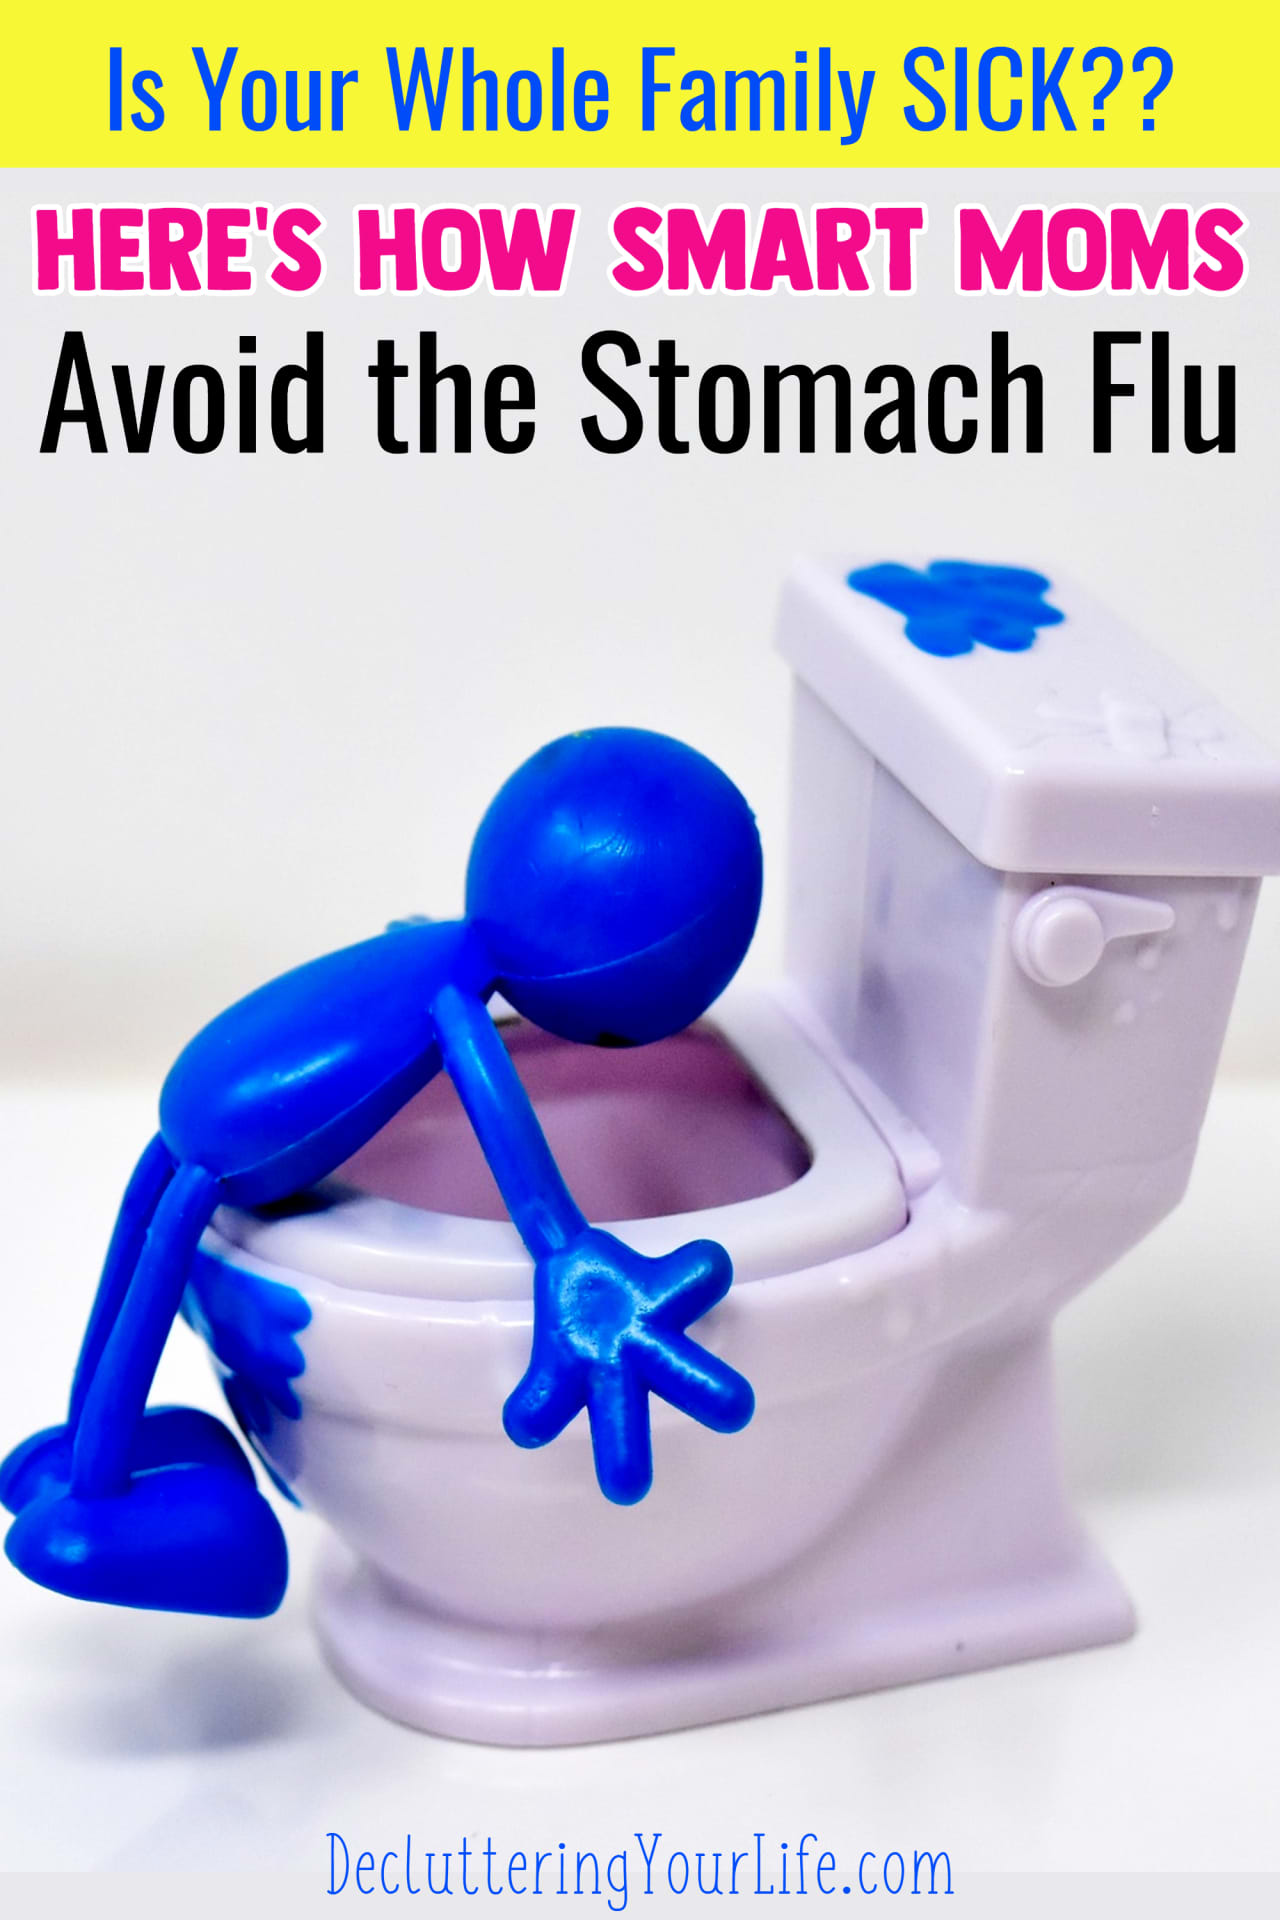 Smart Moms KNOW how to keep germs from spreading and avoid getting the stomach Flu.  The secret? Hydrogen Peroxide is the BEST way to kill germs (like the nasty FLU germs) – there are some hydrogen peroxide cleaners that even kill the worst stomach bug germs, like the NoroVirus and the dreaded roto-virus!  Here's how to use it...